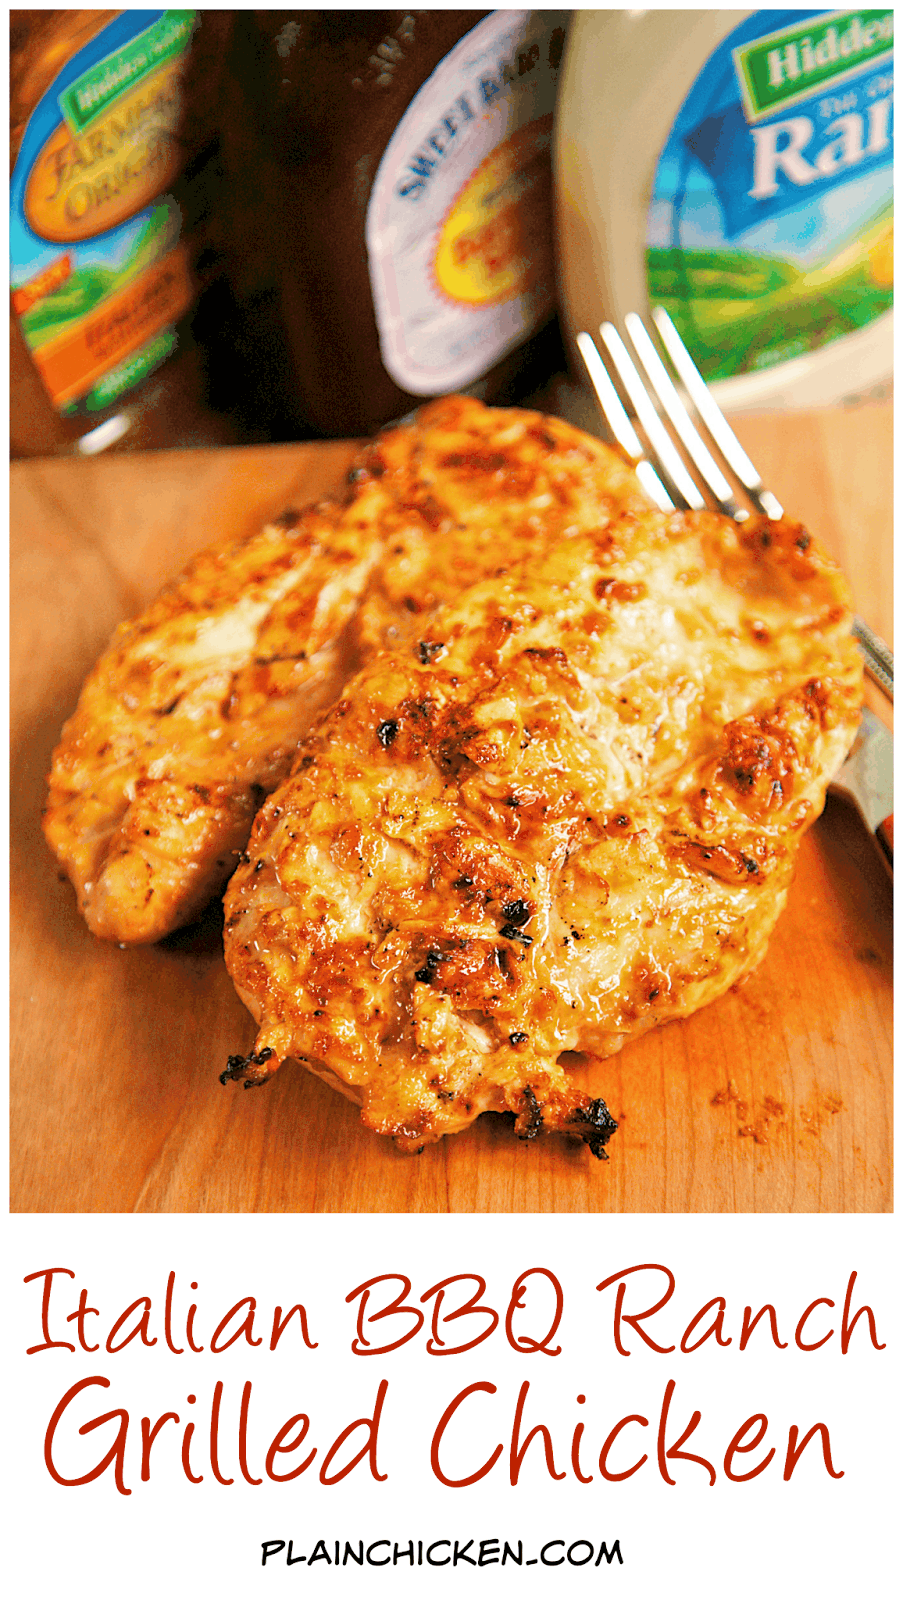 Italian BBQ Ranch Grilled Chicken Recipe - simply 4 ingredient recipe! Let the chicken marinate all day in this yummy mixture for the yummiest, juiciest chicken ever! Leftover are great on top of a salad, in a quesadilla or on top of a yummy flatbread.